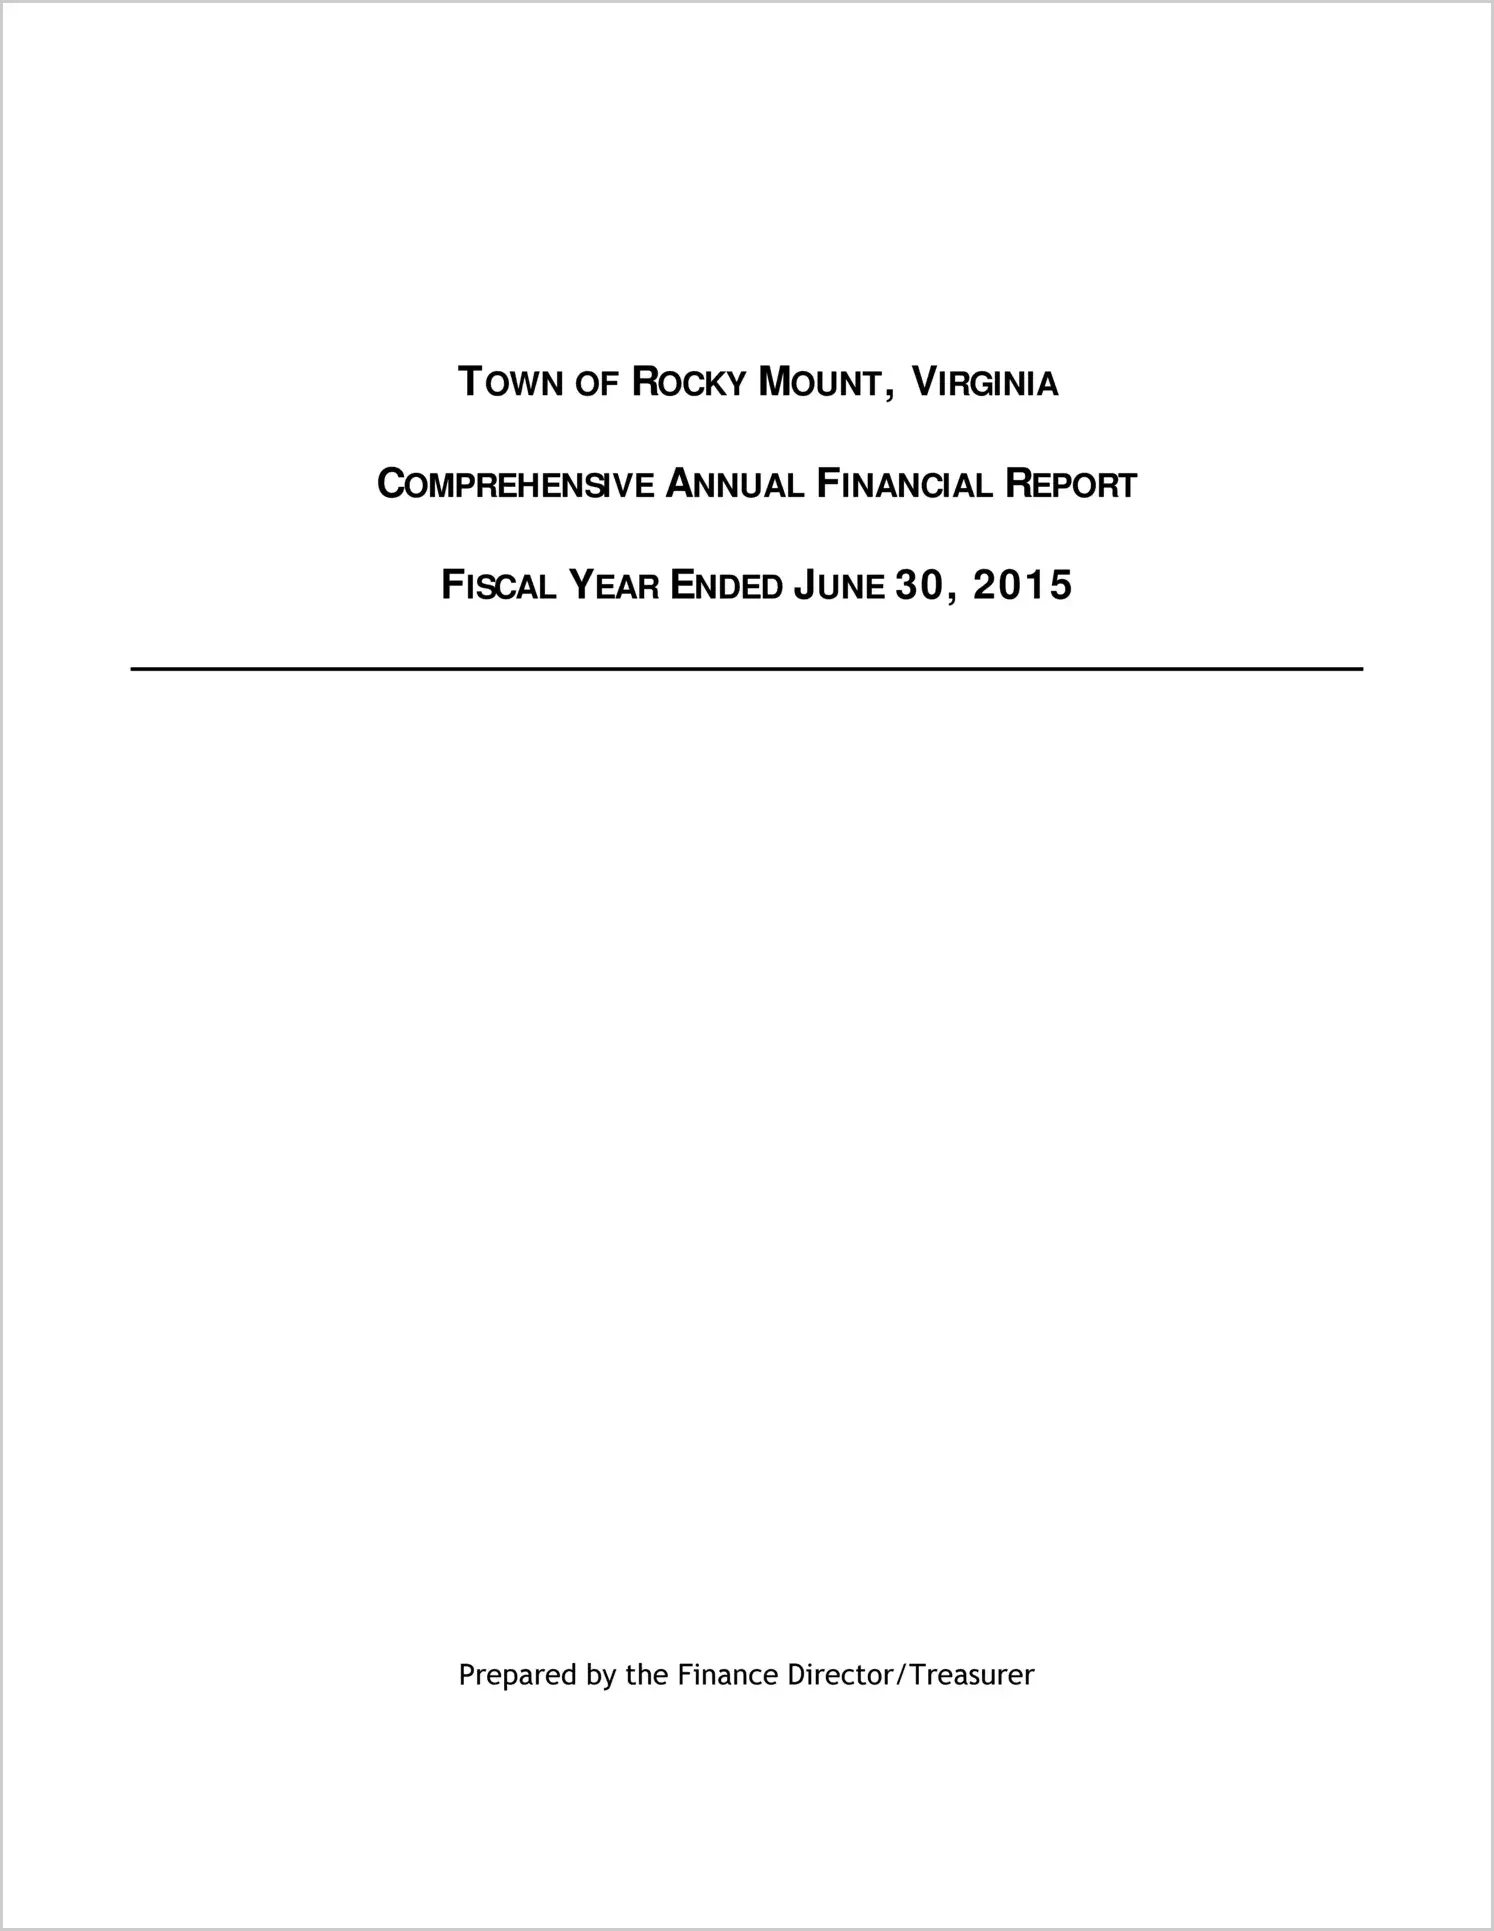 2015 Annual Financial Report for Town of Rocky Mount